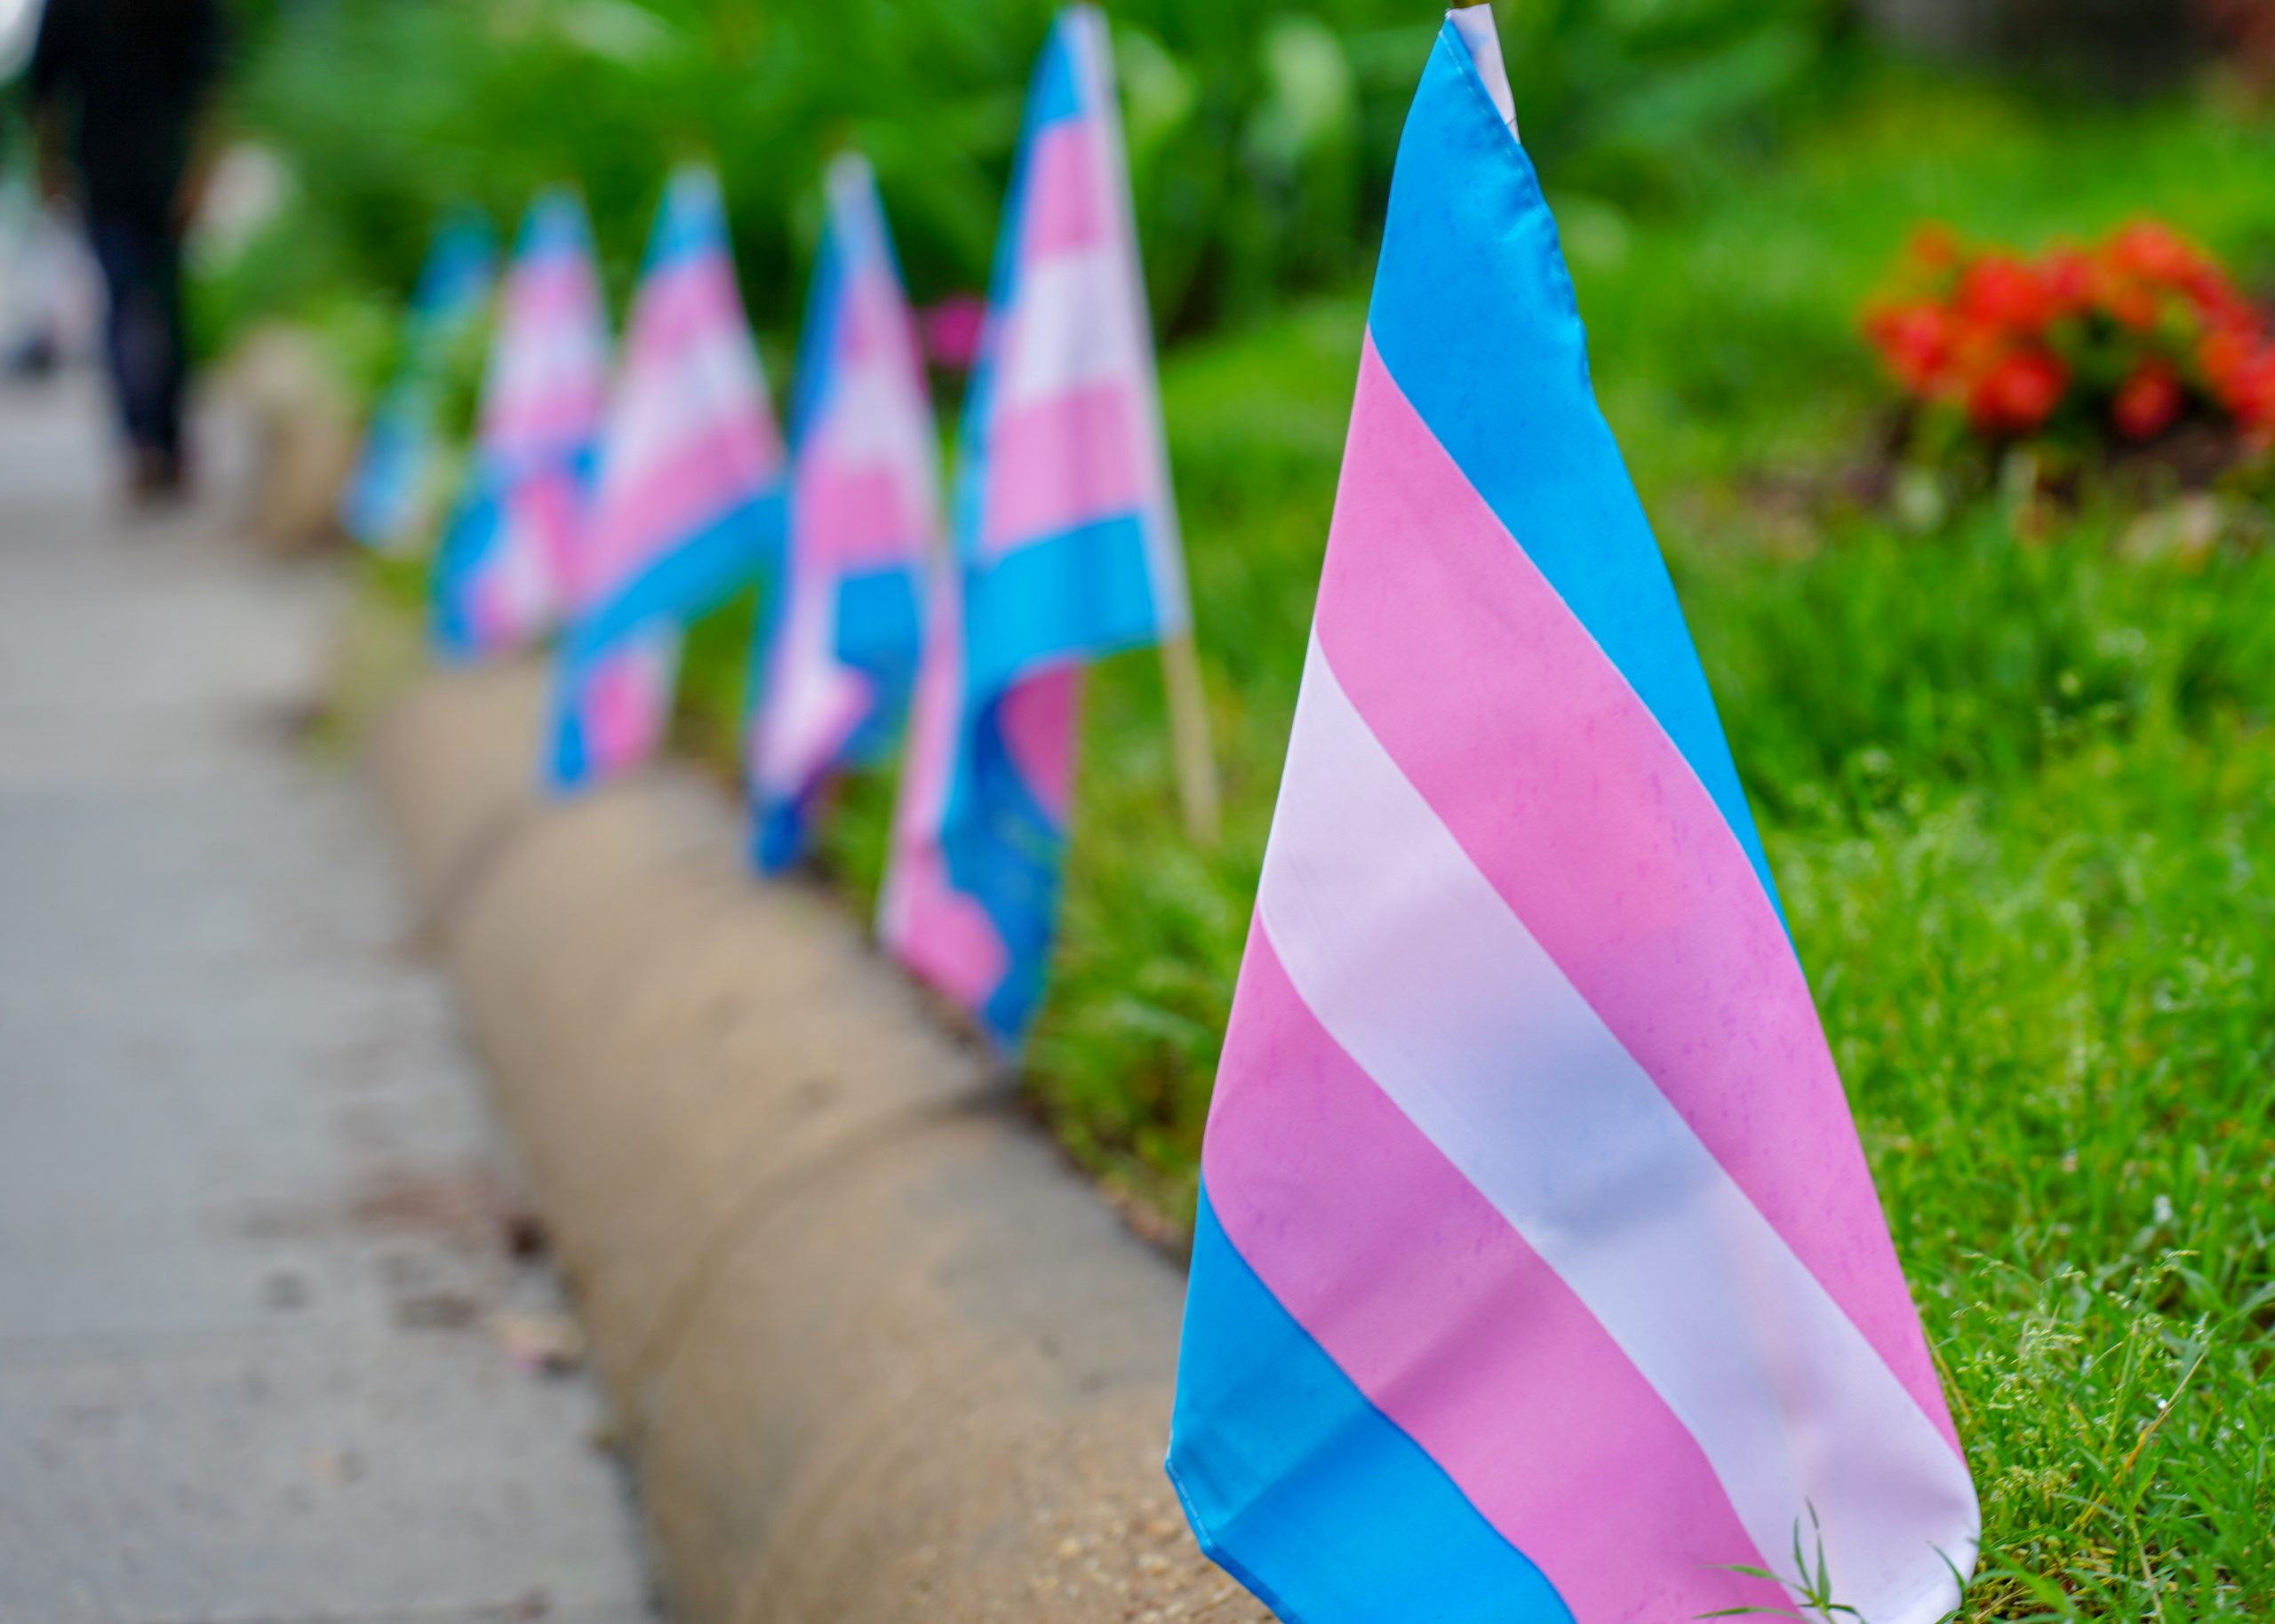 A row of Trans pride flags